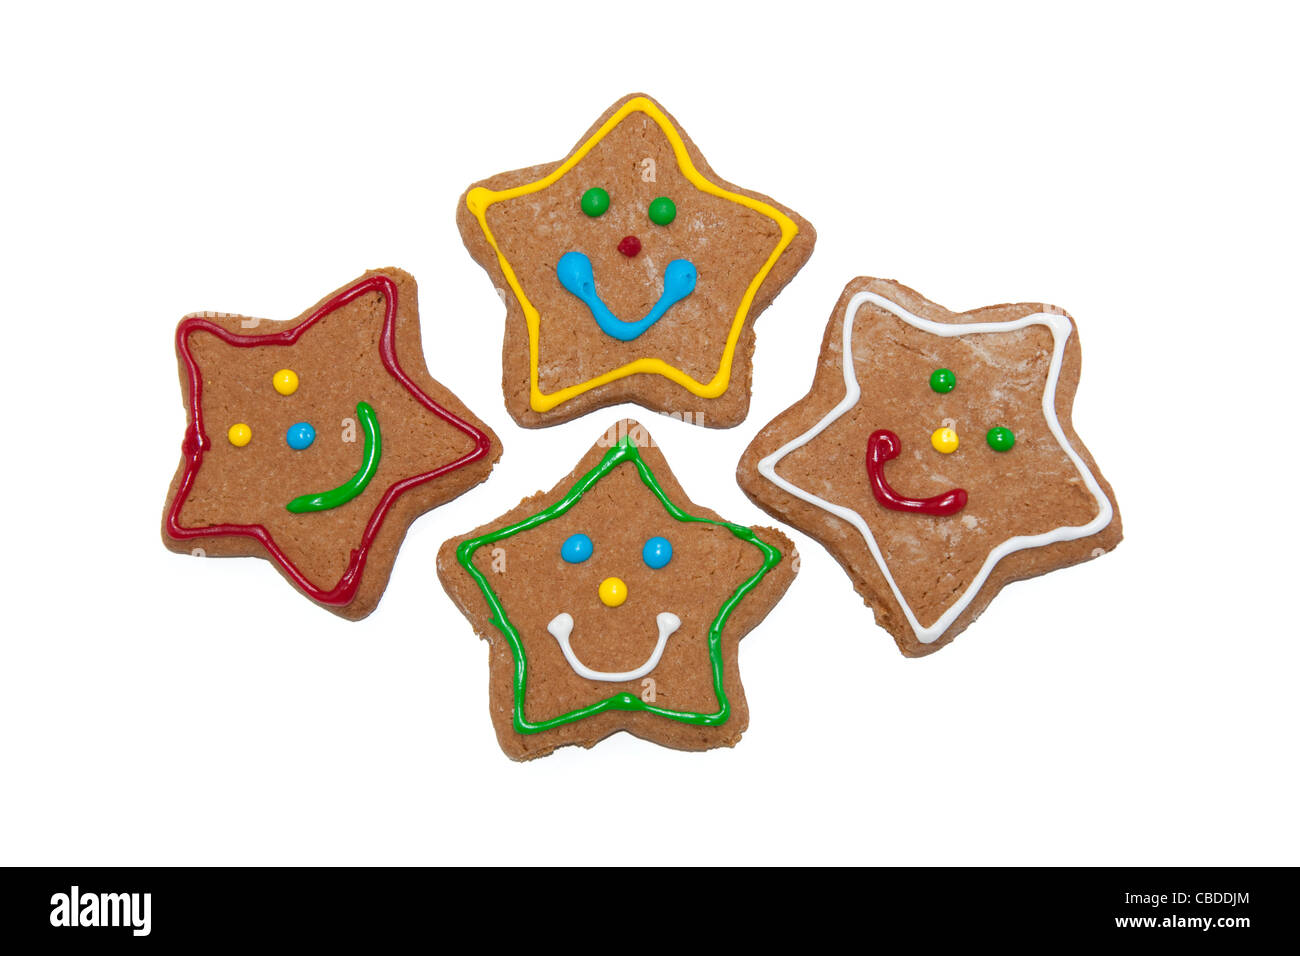 Star shaped gingerbread Christmas cookies on white background Stock Photo